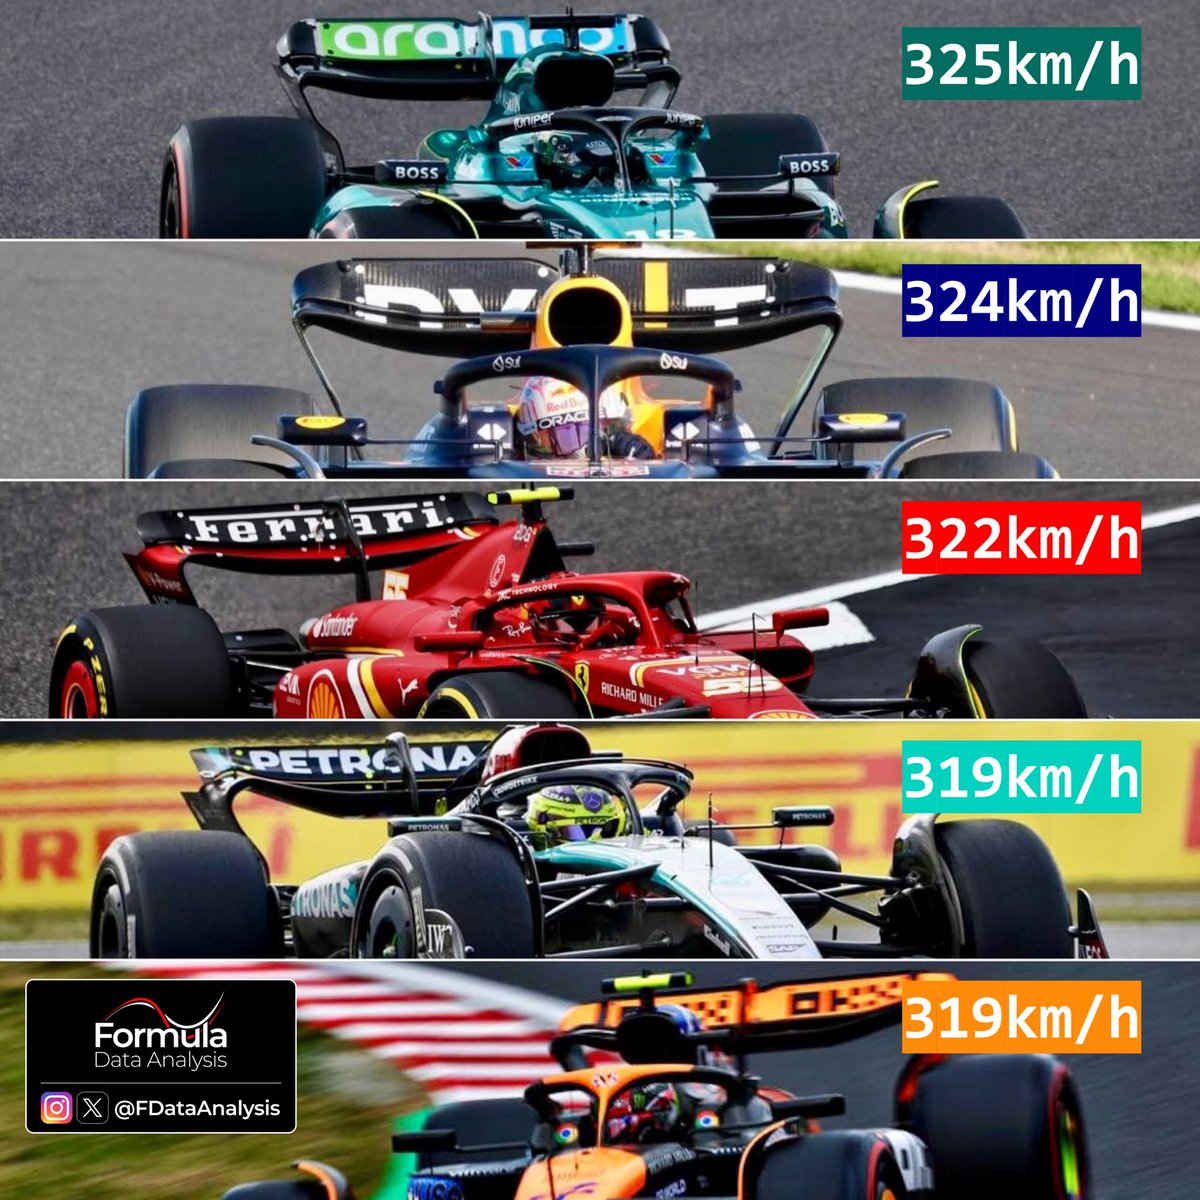 The #ChineseGP features a 1.4km full-throttle section!➡️Top speed: crucial for lap time and to attack/defend💡 Image: top speed achieved in the last qualifying, during each team's best lap 🟢Aston has solved their drag issues, contrary to ⚫️Mercedes and 🟠McL 🔴Ferrari will